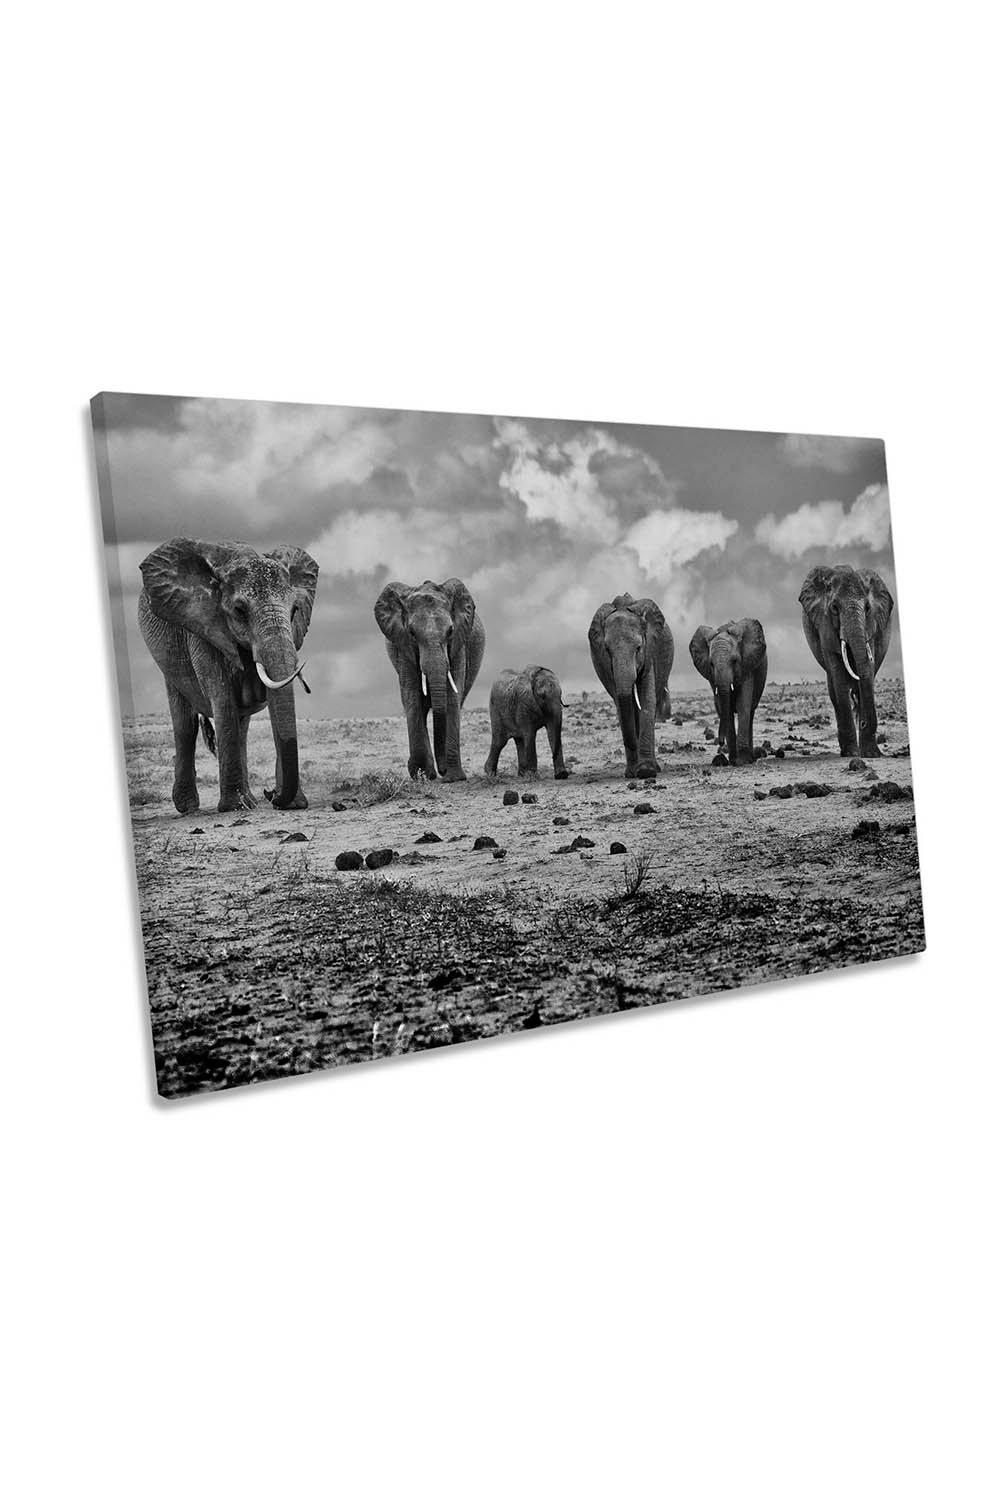 Big Family Elephants Canvas Wall Art Picture Print